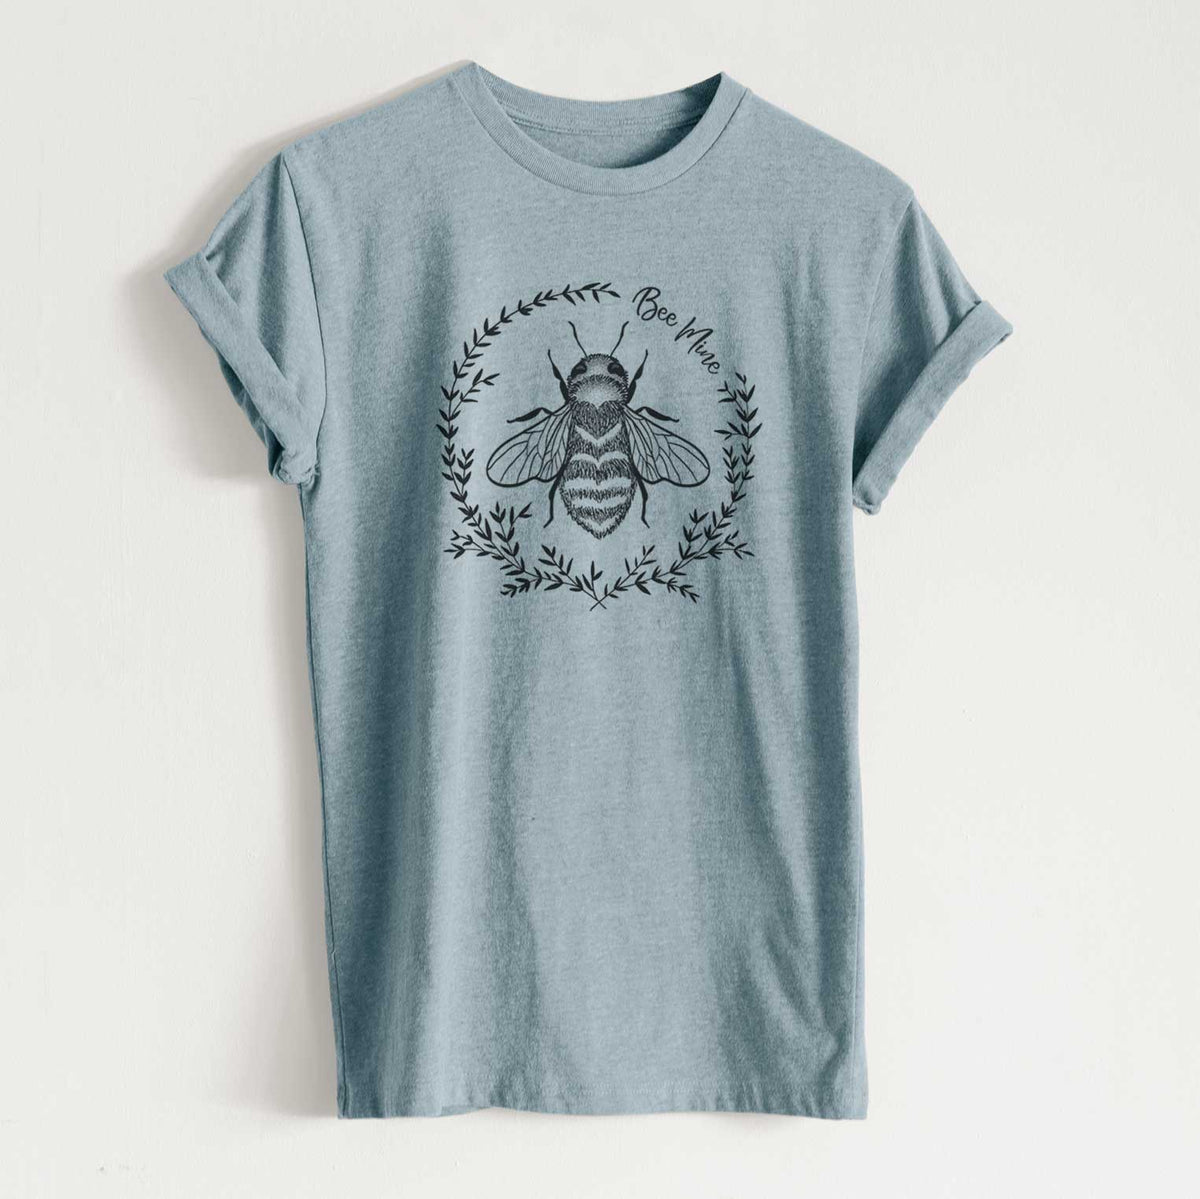 Bee Mine - Unisex Recycled Eco Tee  - CLOSEOUT - FINAL SALE